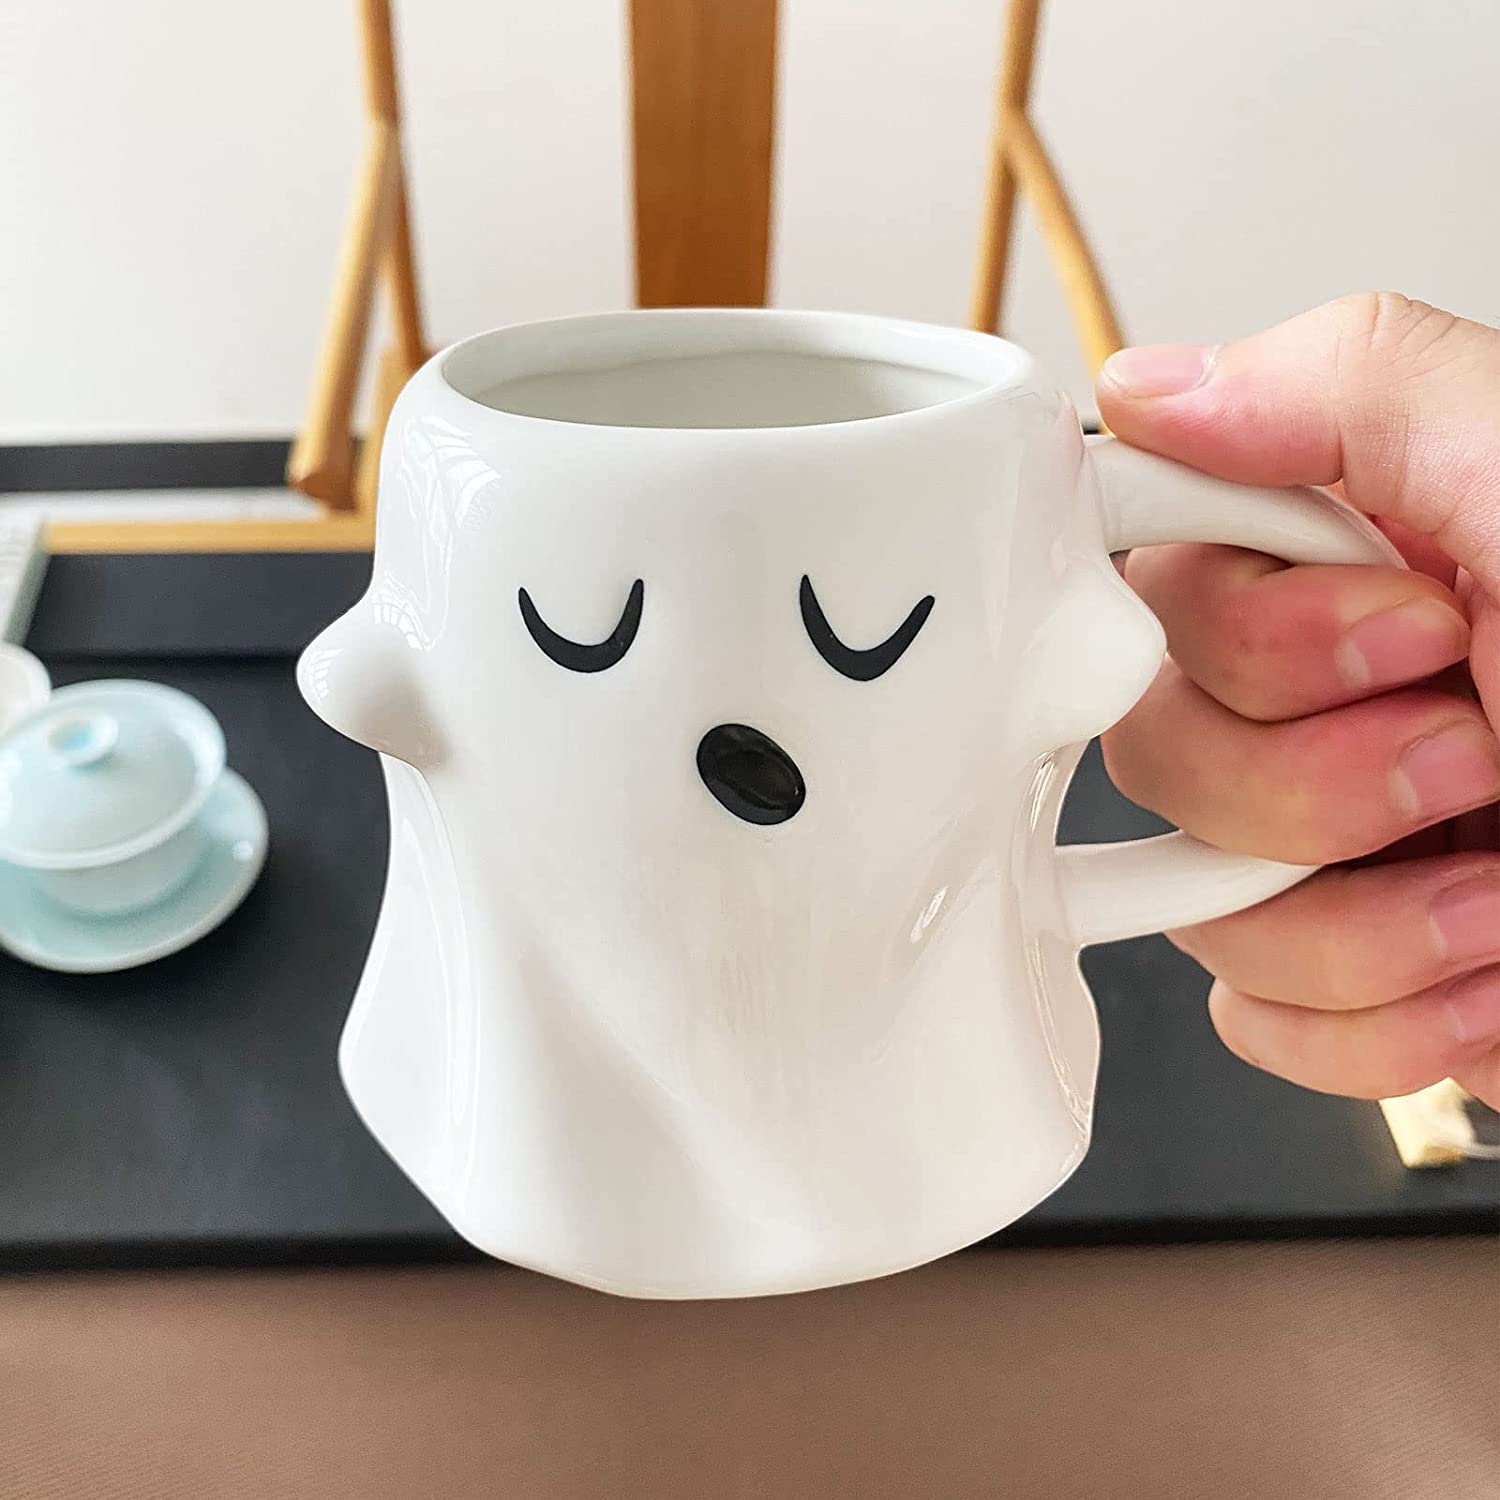 A hand holding a white ceramic ghost shaped coffee mug which features an expression as if it is yawning and waking up.